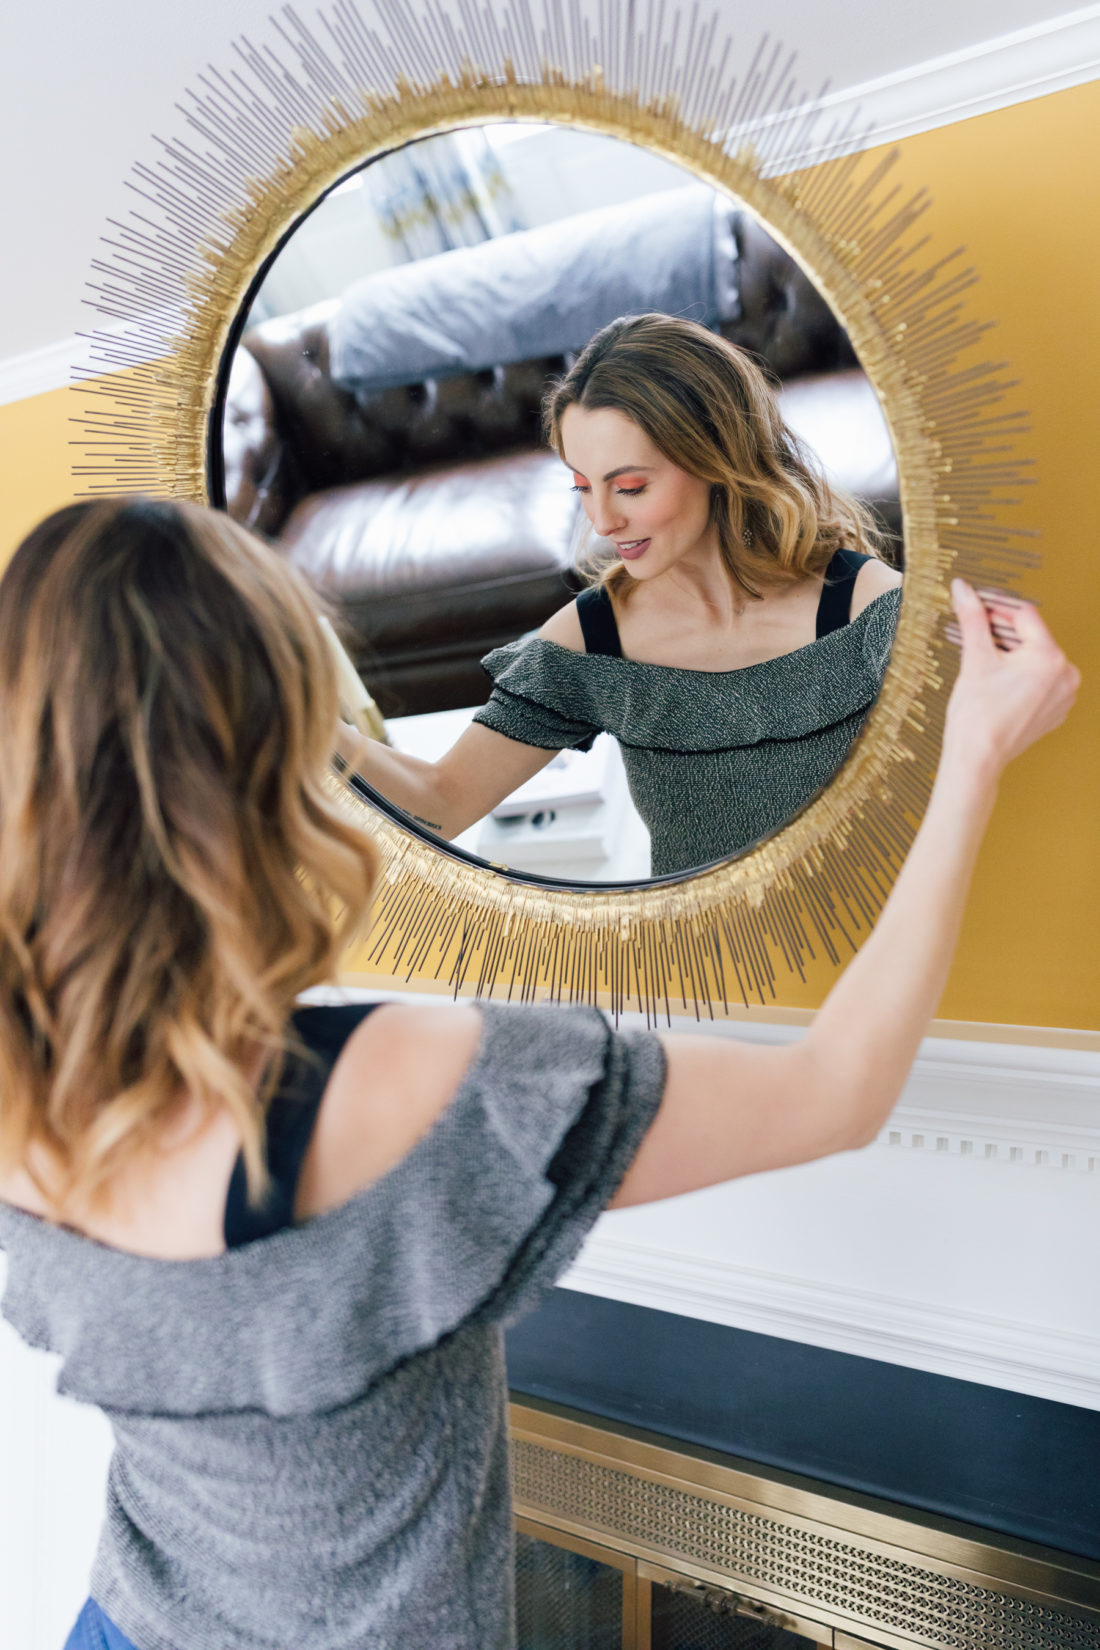 Eva Amurri Martino wears an off the shoulder ruffle top, and takes a starburst mirror off of the wall in her connecticut home